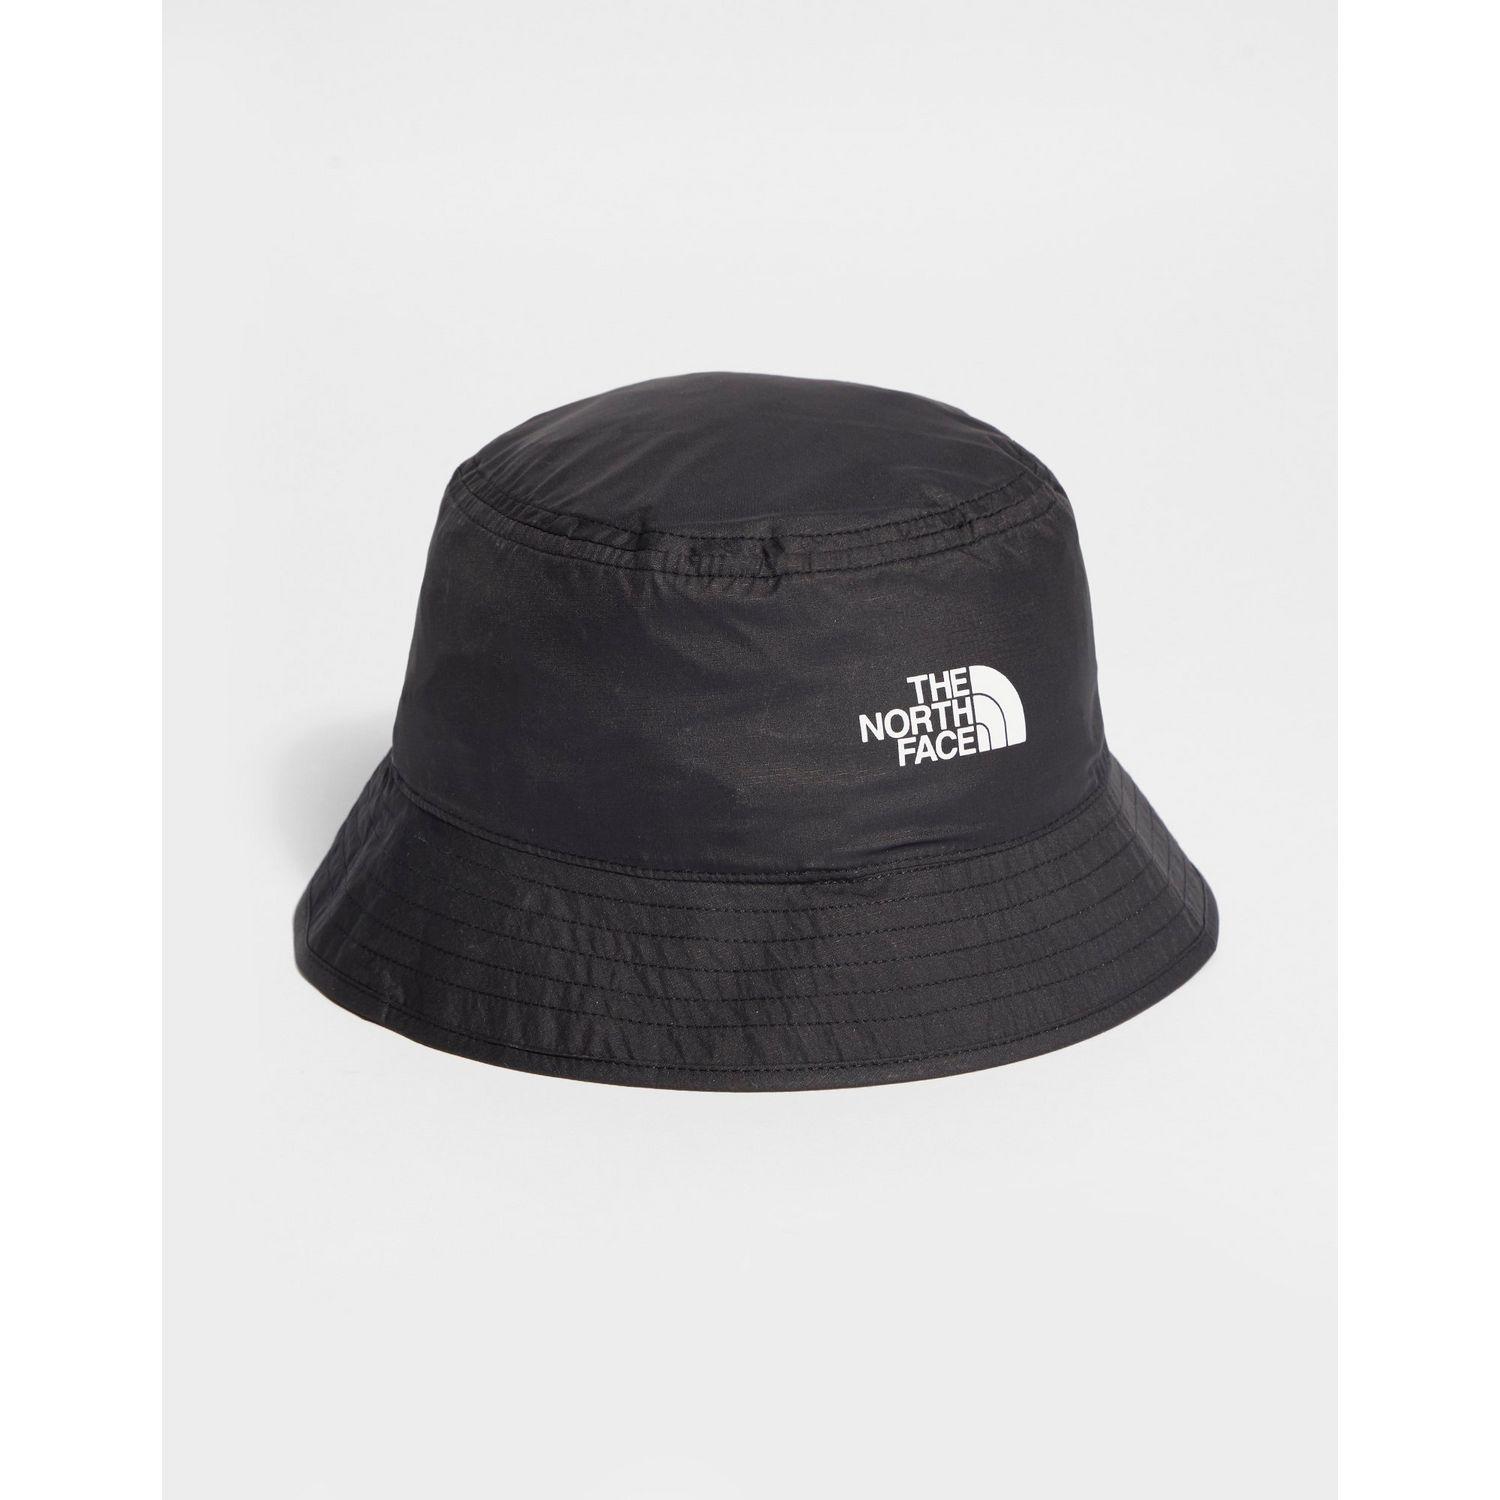 The North face Bucket hat/Mask. The North face Bucket hat. Панама с маской the North face. Шляпа the North face Twist and Pouch. N hats